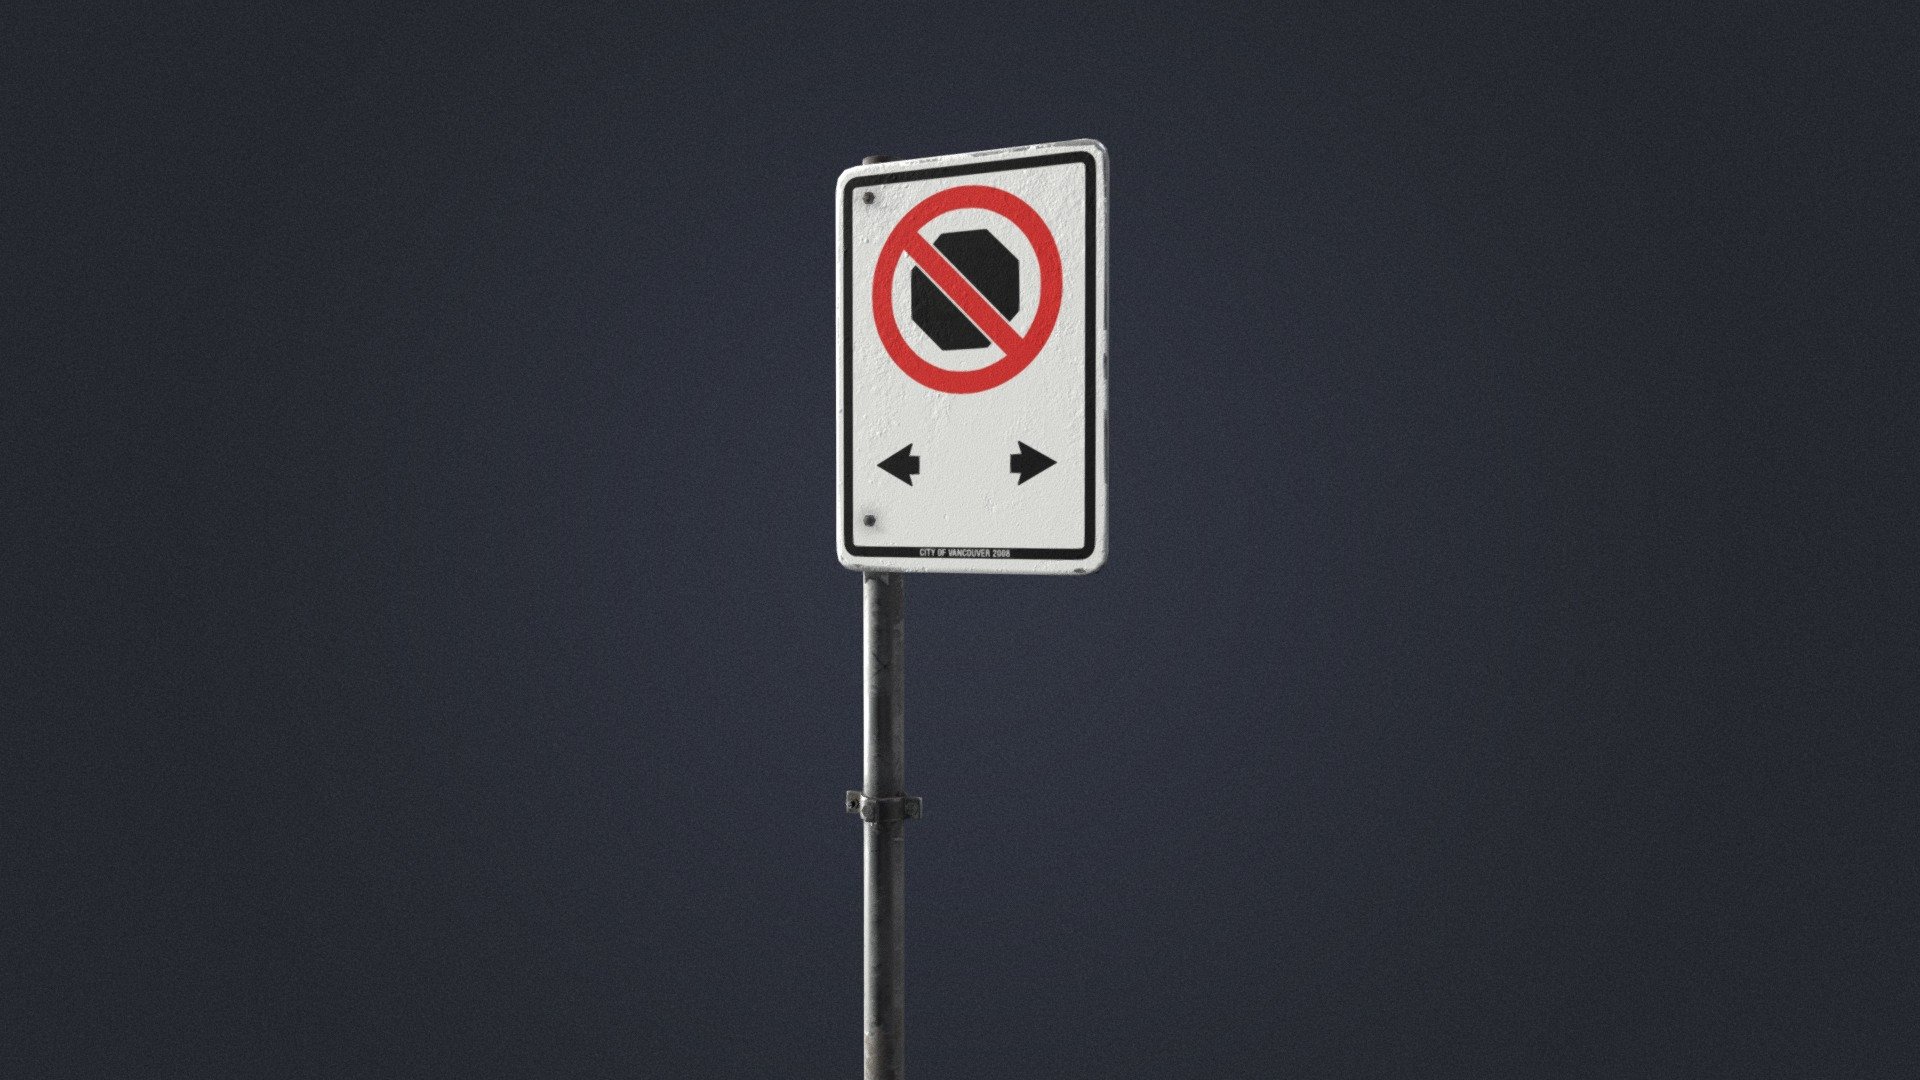 No stopping sign from Canada - Vancouver No Stopping Sign - Buy Royalty Free 3D model by Polygon Alley (@jmayala) 3d model